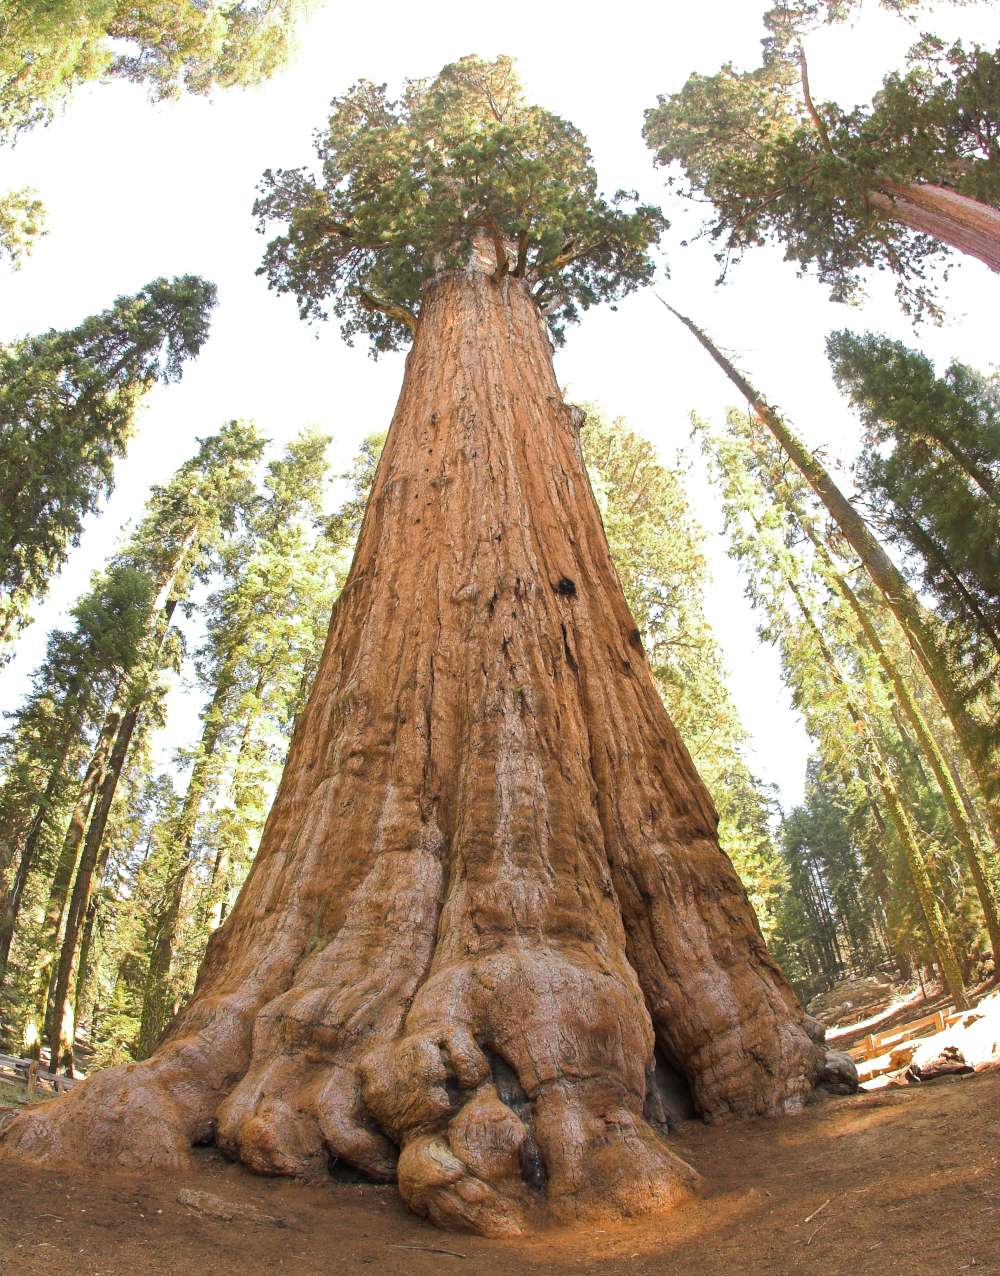 Take a look at the General Sherman Tree.